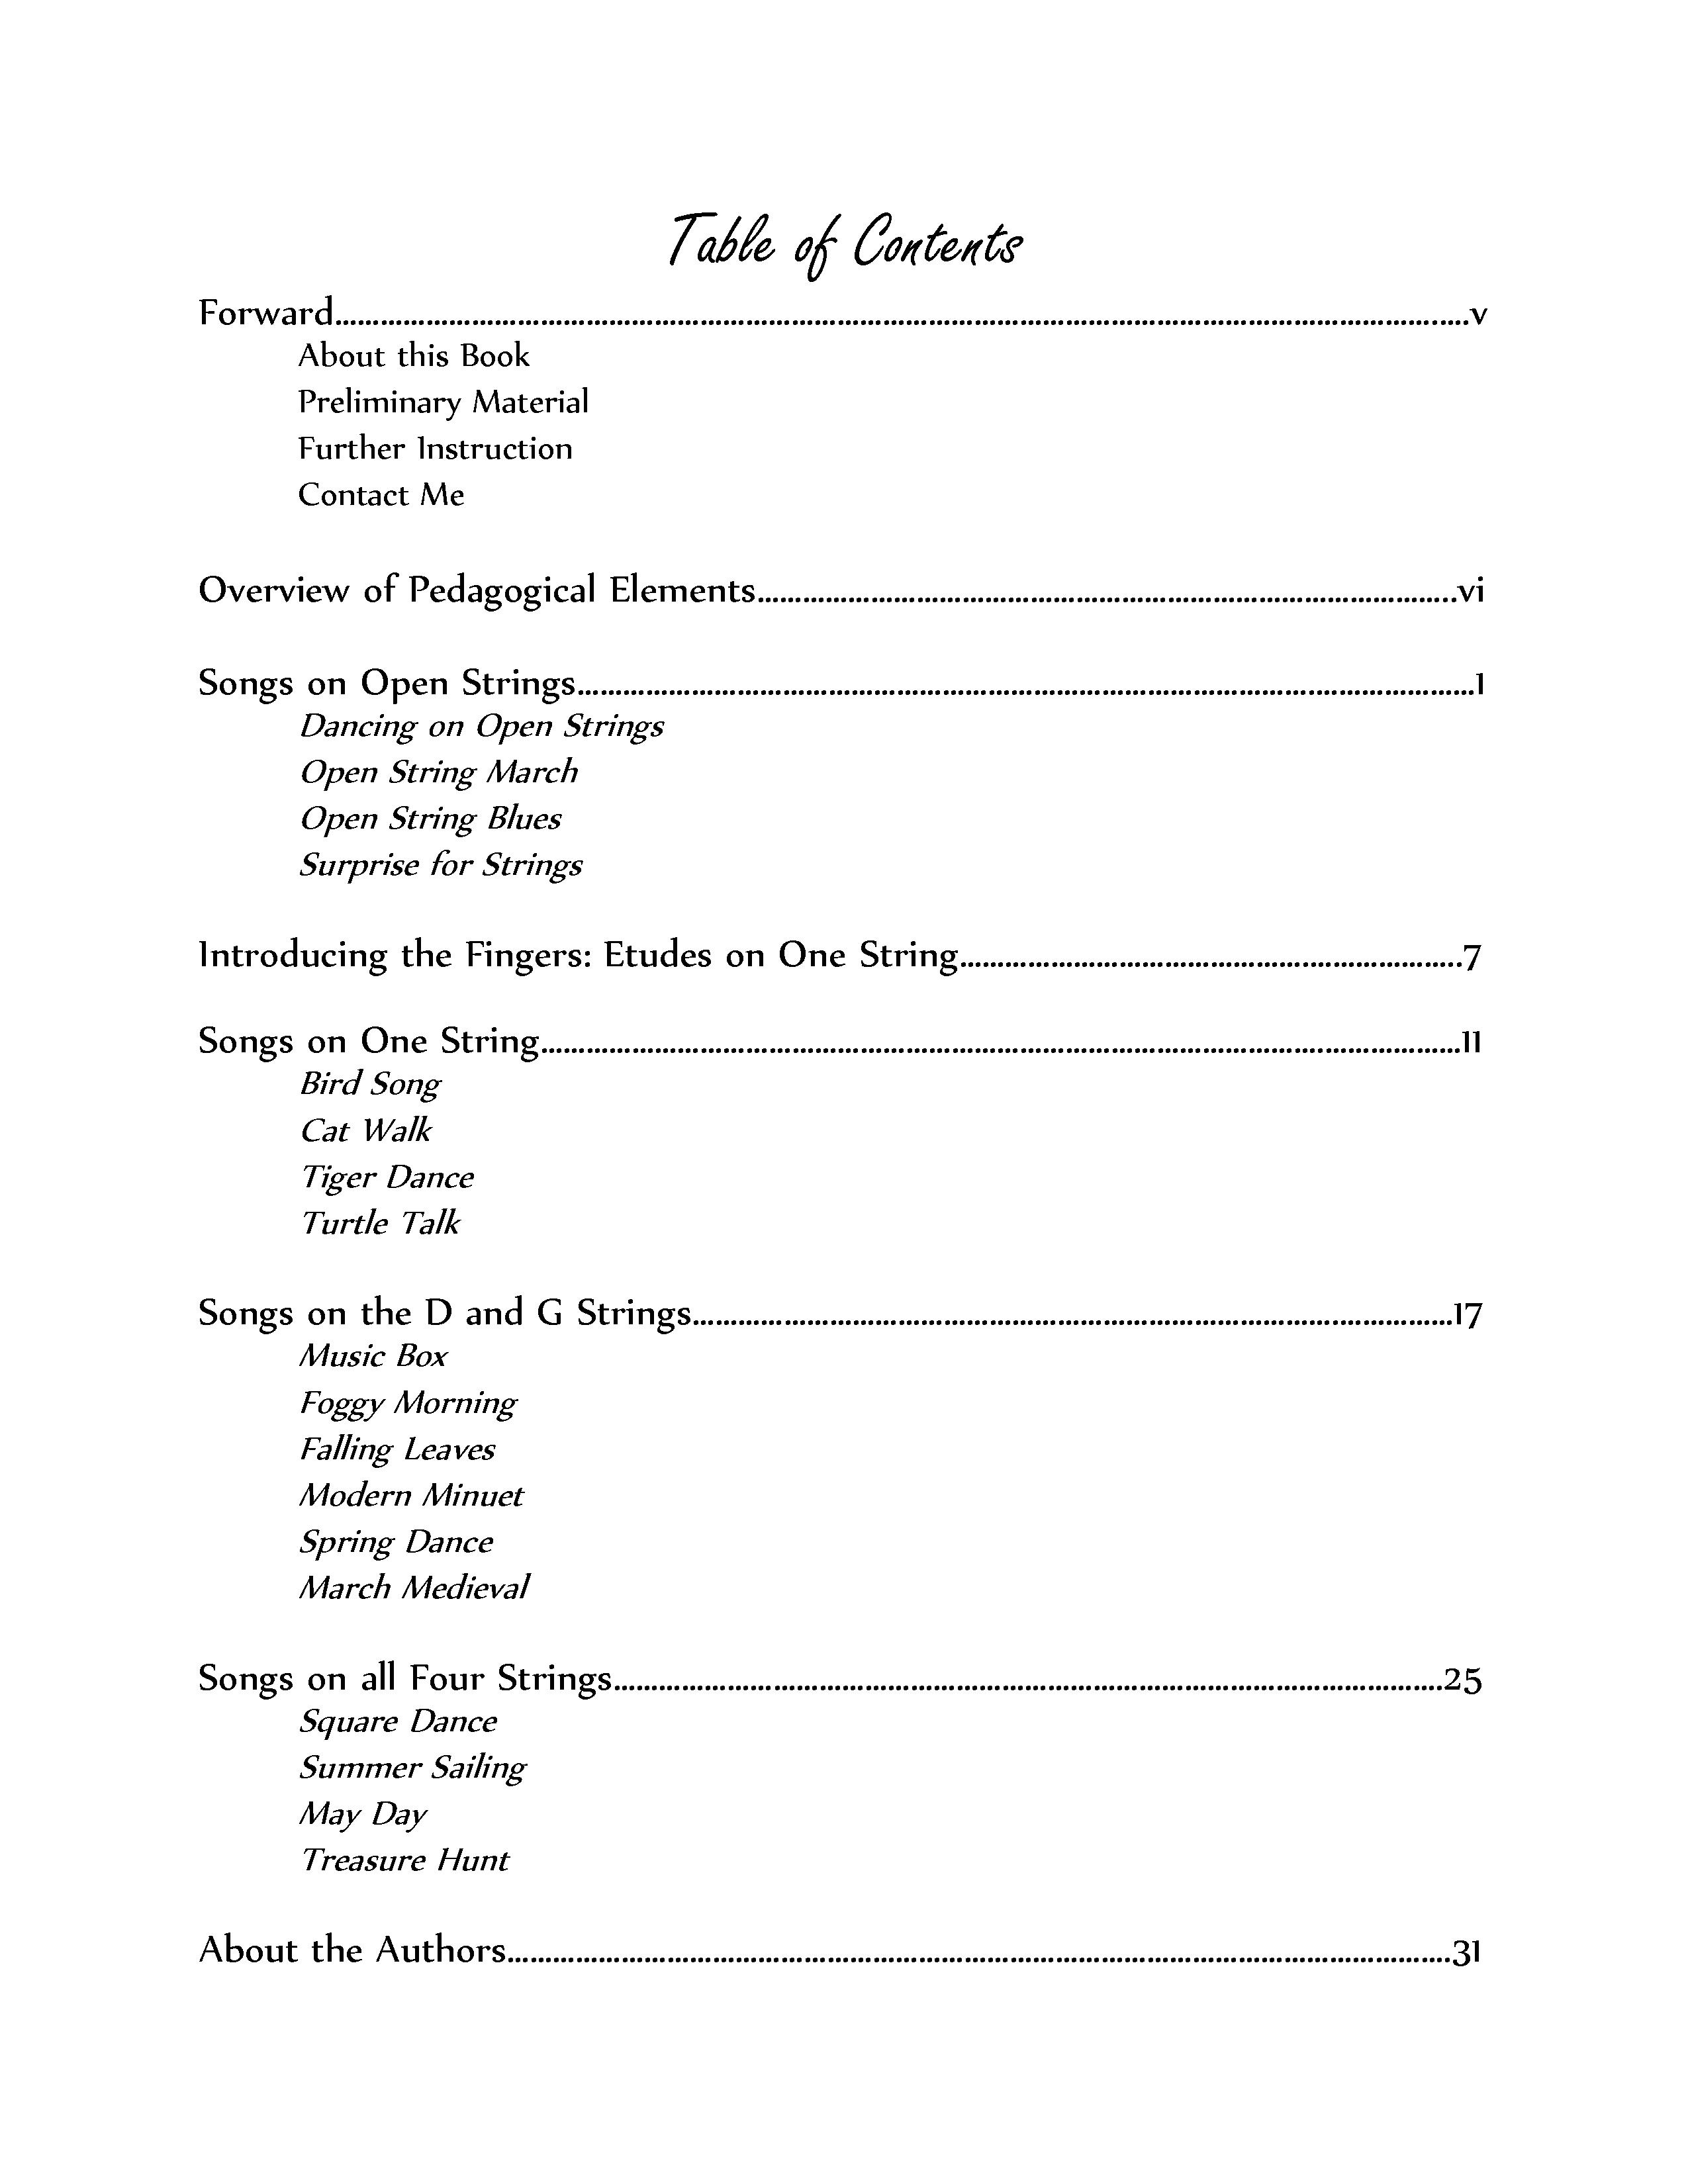 The Beginning Violinist: Table of Contents